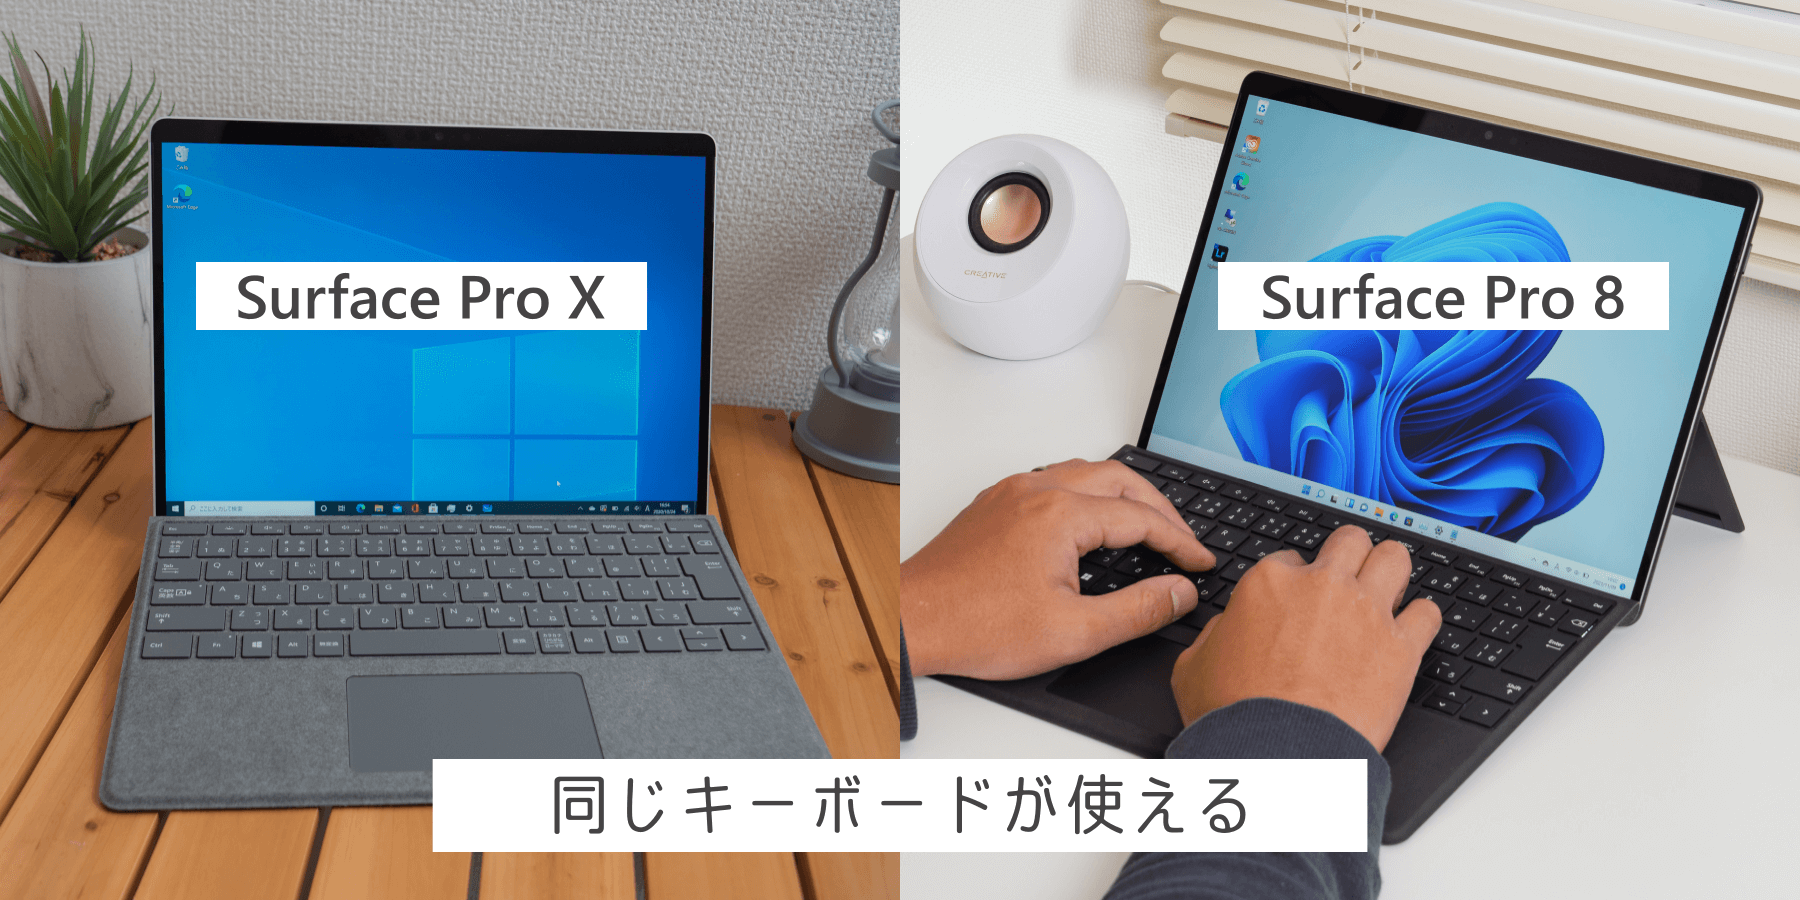 Surface Pro 8 対応キーボード完全レビュー！Surface 歴４年の経験を踏まえ使用感や経年の様子を詳しく解説